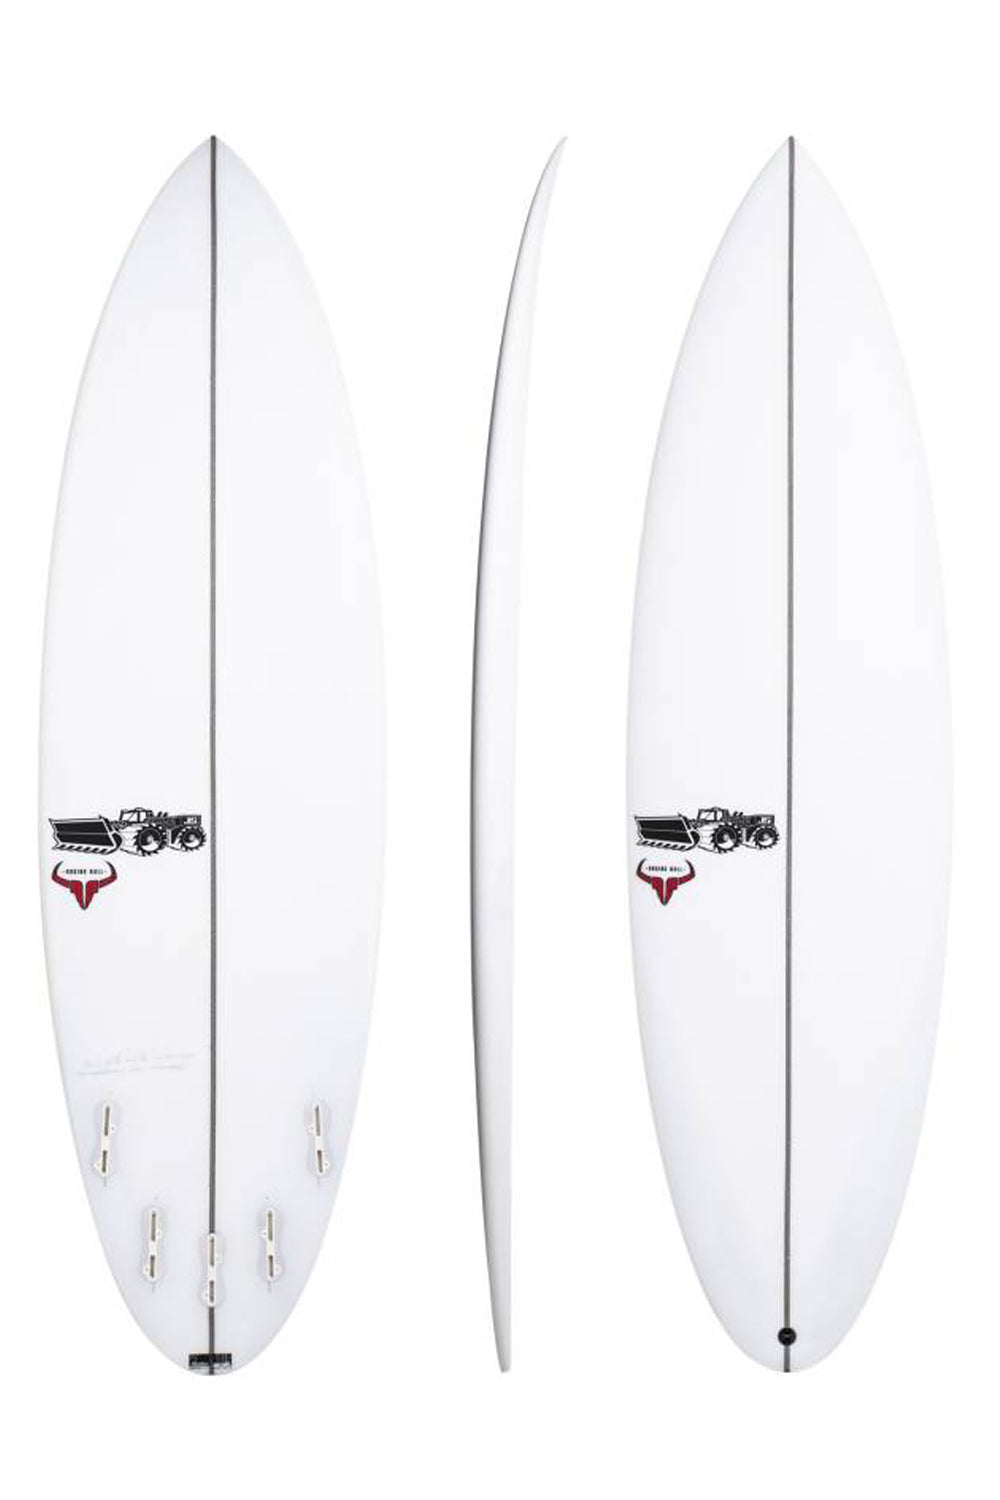 JS Industries Raging Bull Round Tail Surfboard